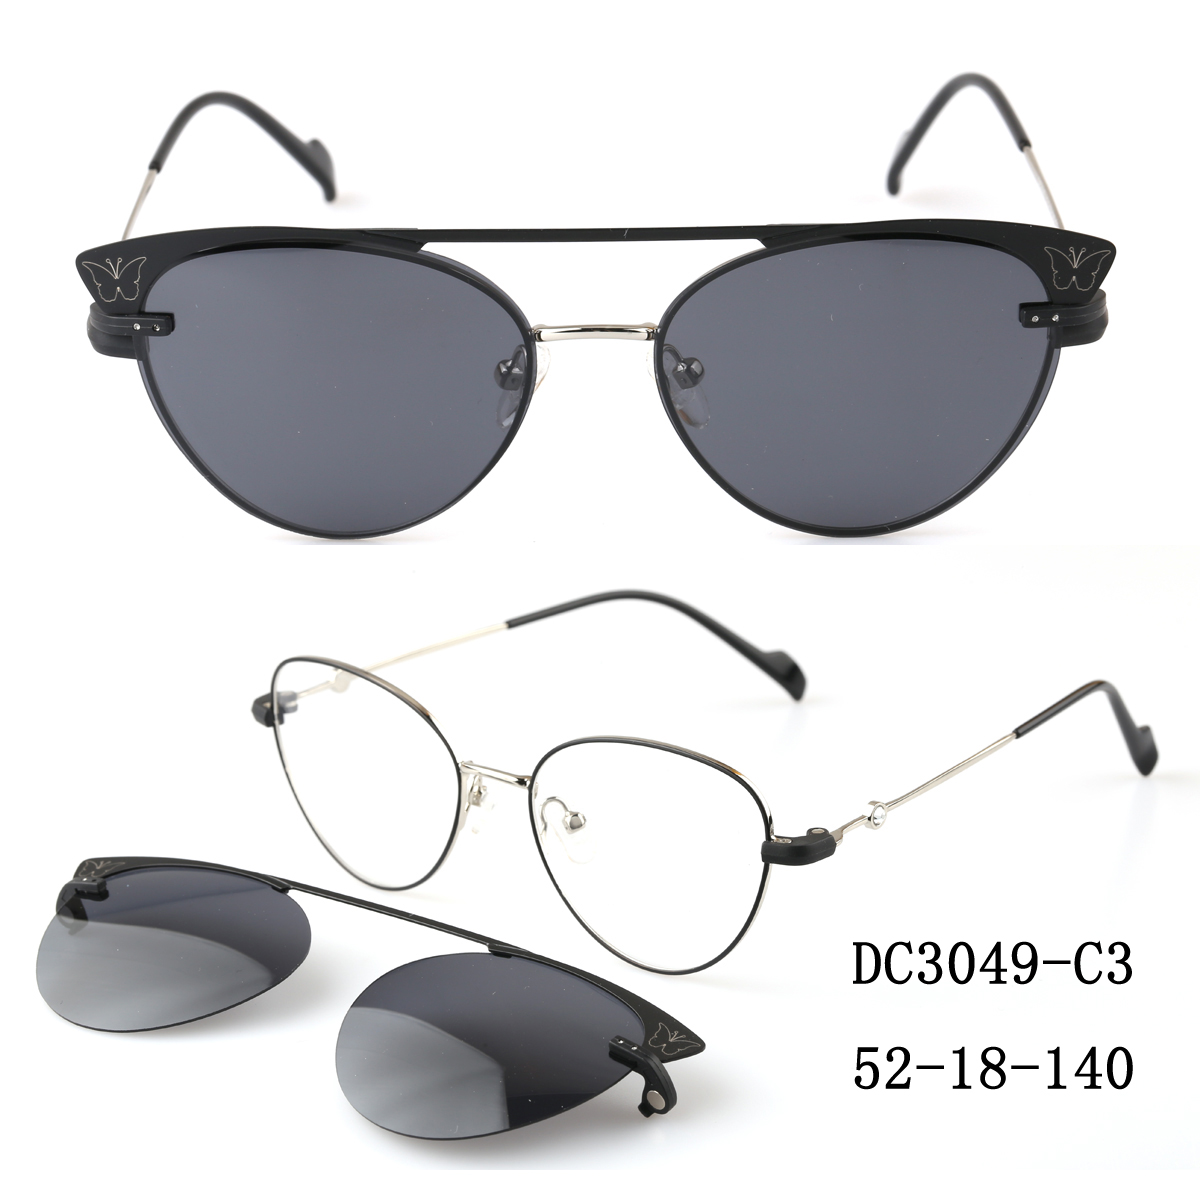 Clip On Shades For Glasses Wholesale, Oem Odm Clip On Sunglasses Shades